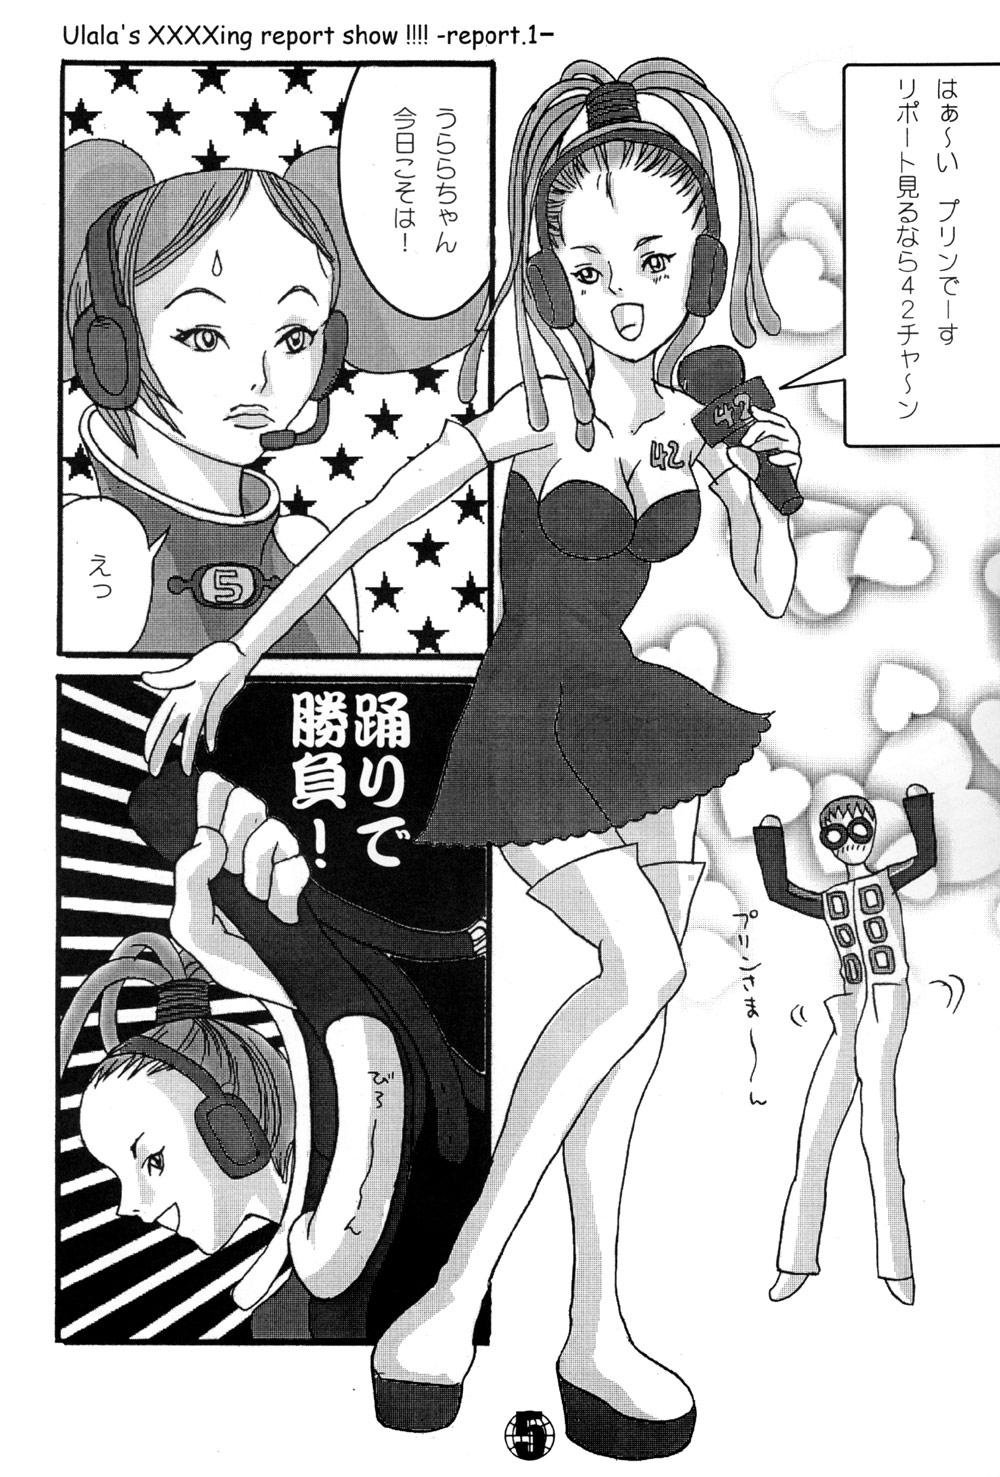 Master Ulala's XXXXing Report Show!!!! - Space channel 5 Suck Cock - Page 5